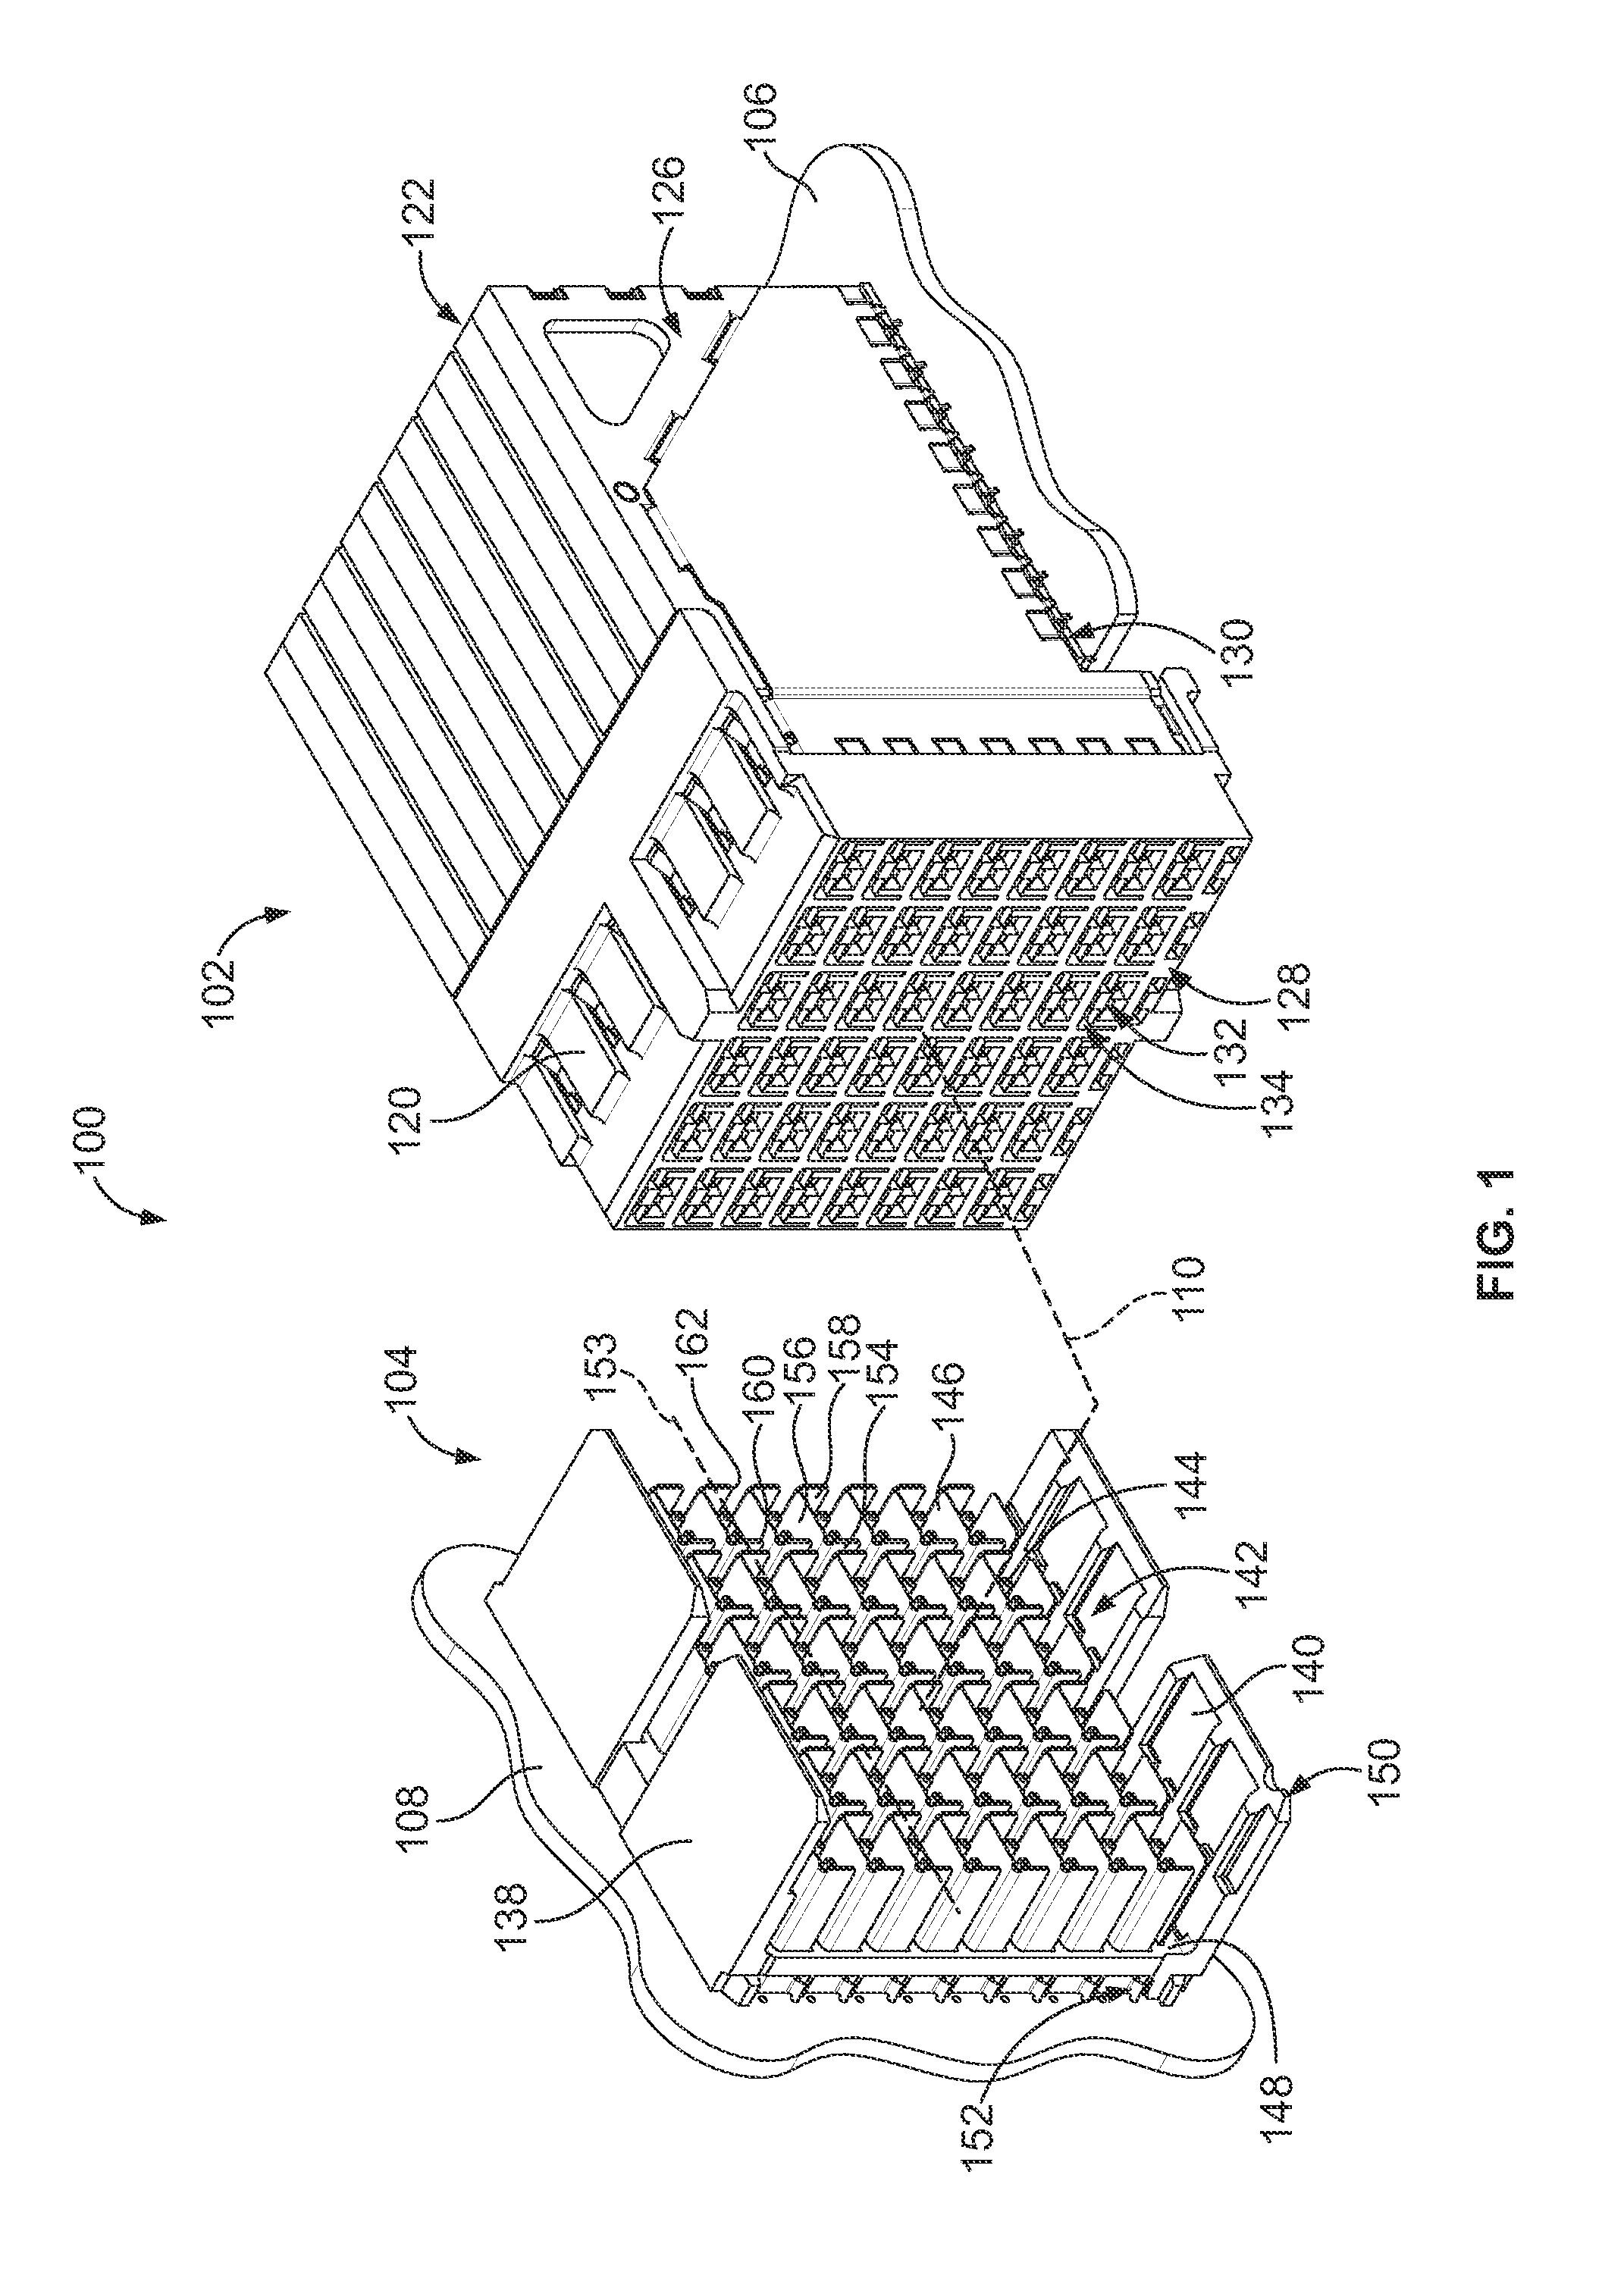 Grounding structures for header and receptacle assemblies